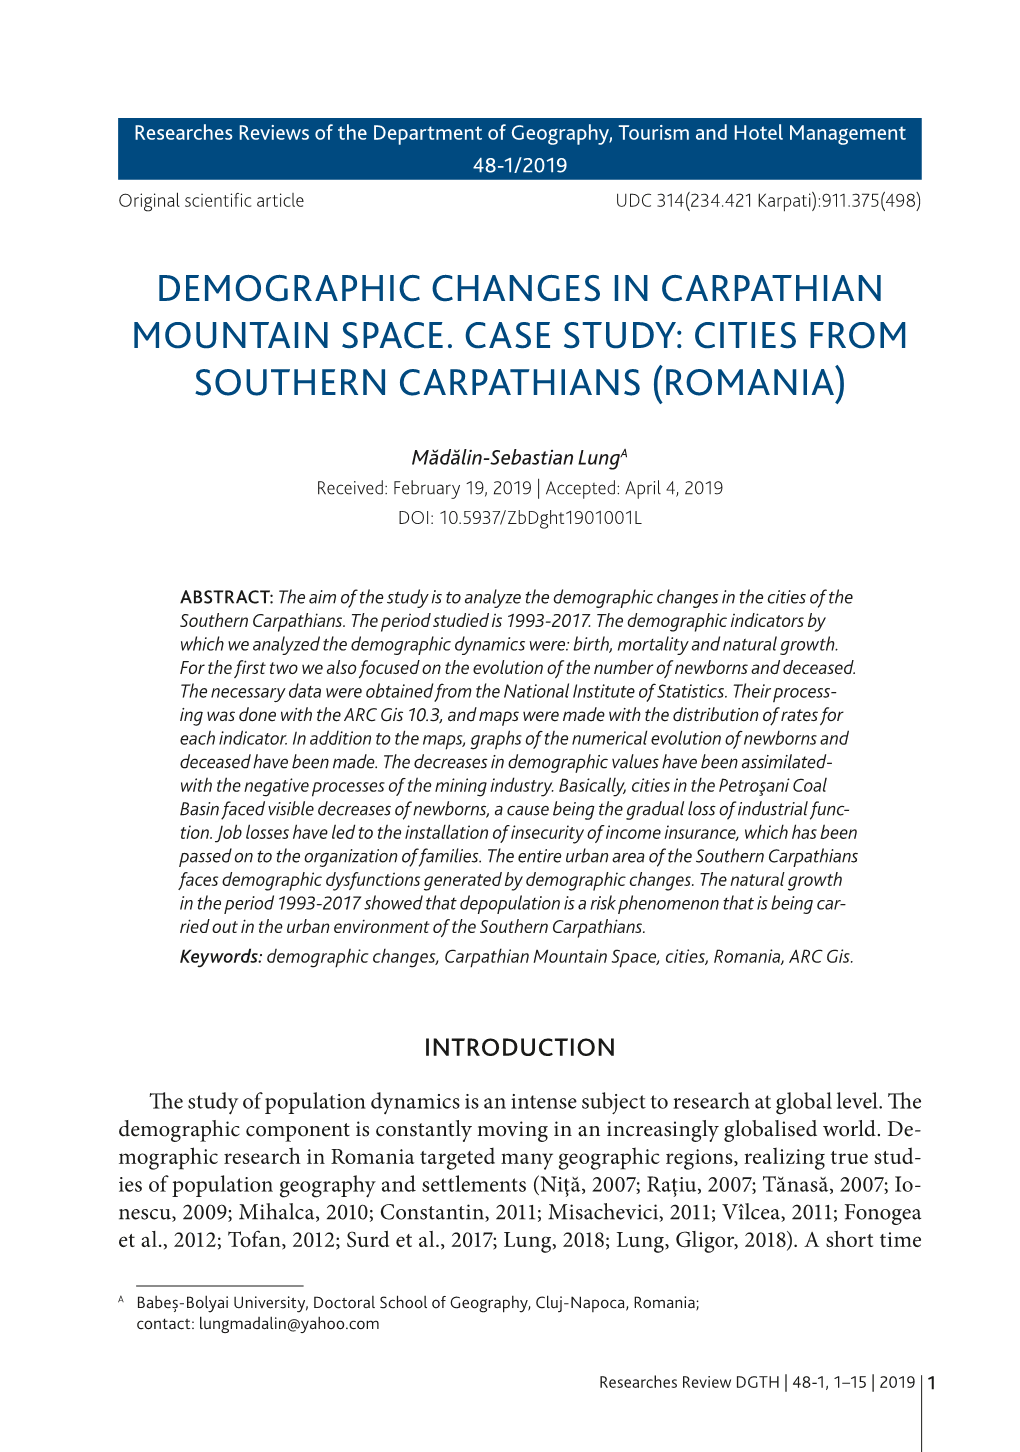 Demographic Changes in Carpathian Mountain Space. Case Study: Cities from Southern Carpathians (Romania)